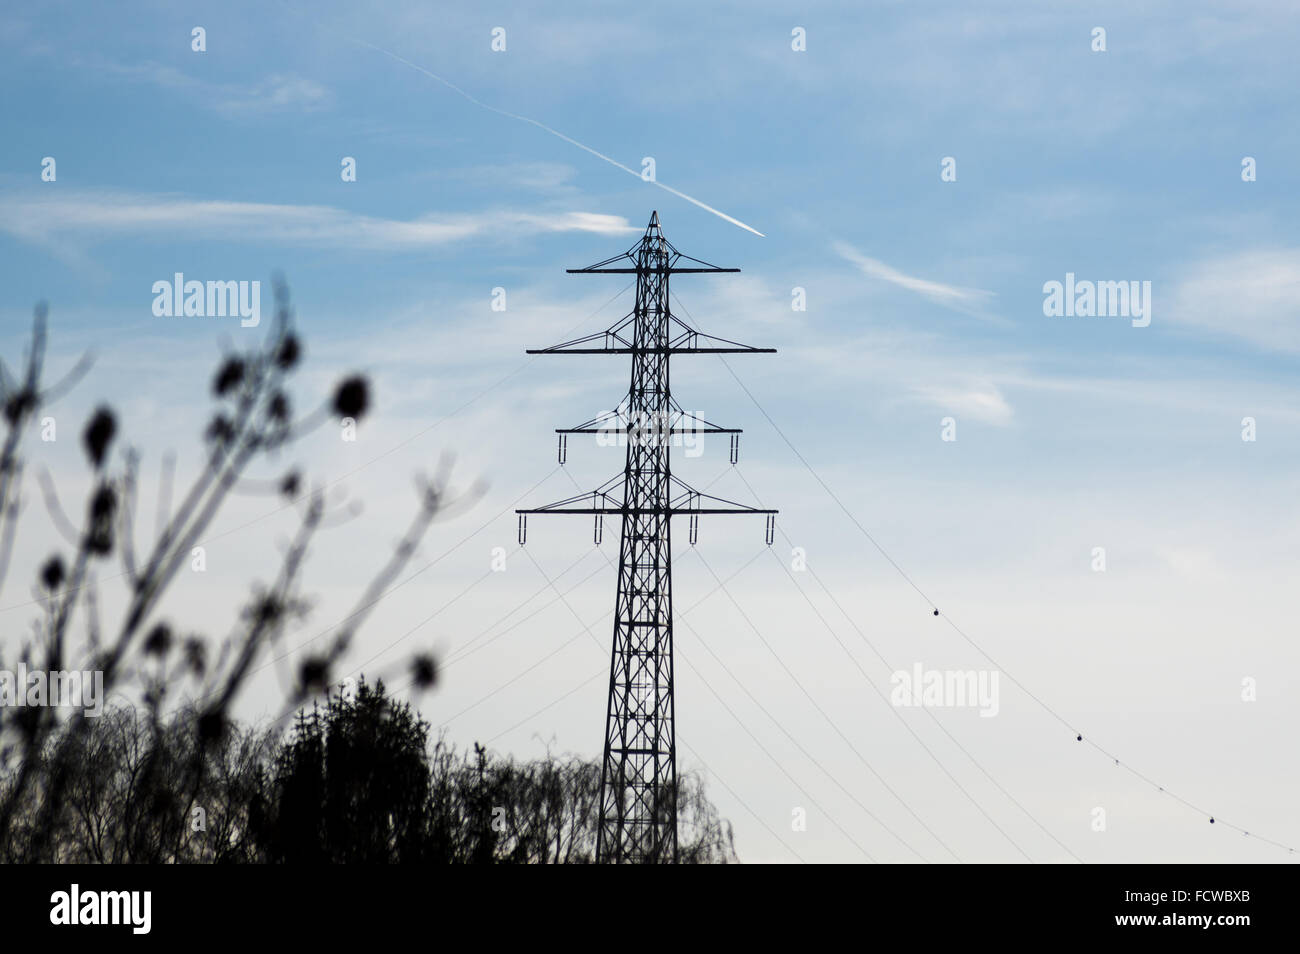 high-voltage electricity pylons against blue sky with clouds Stock Photo